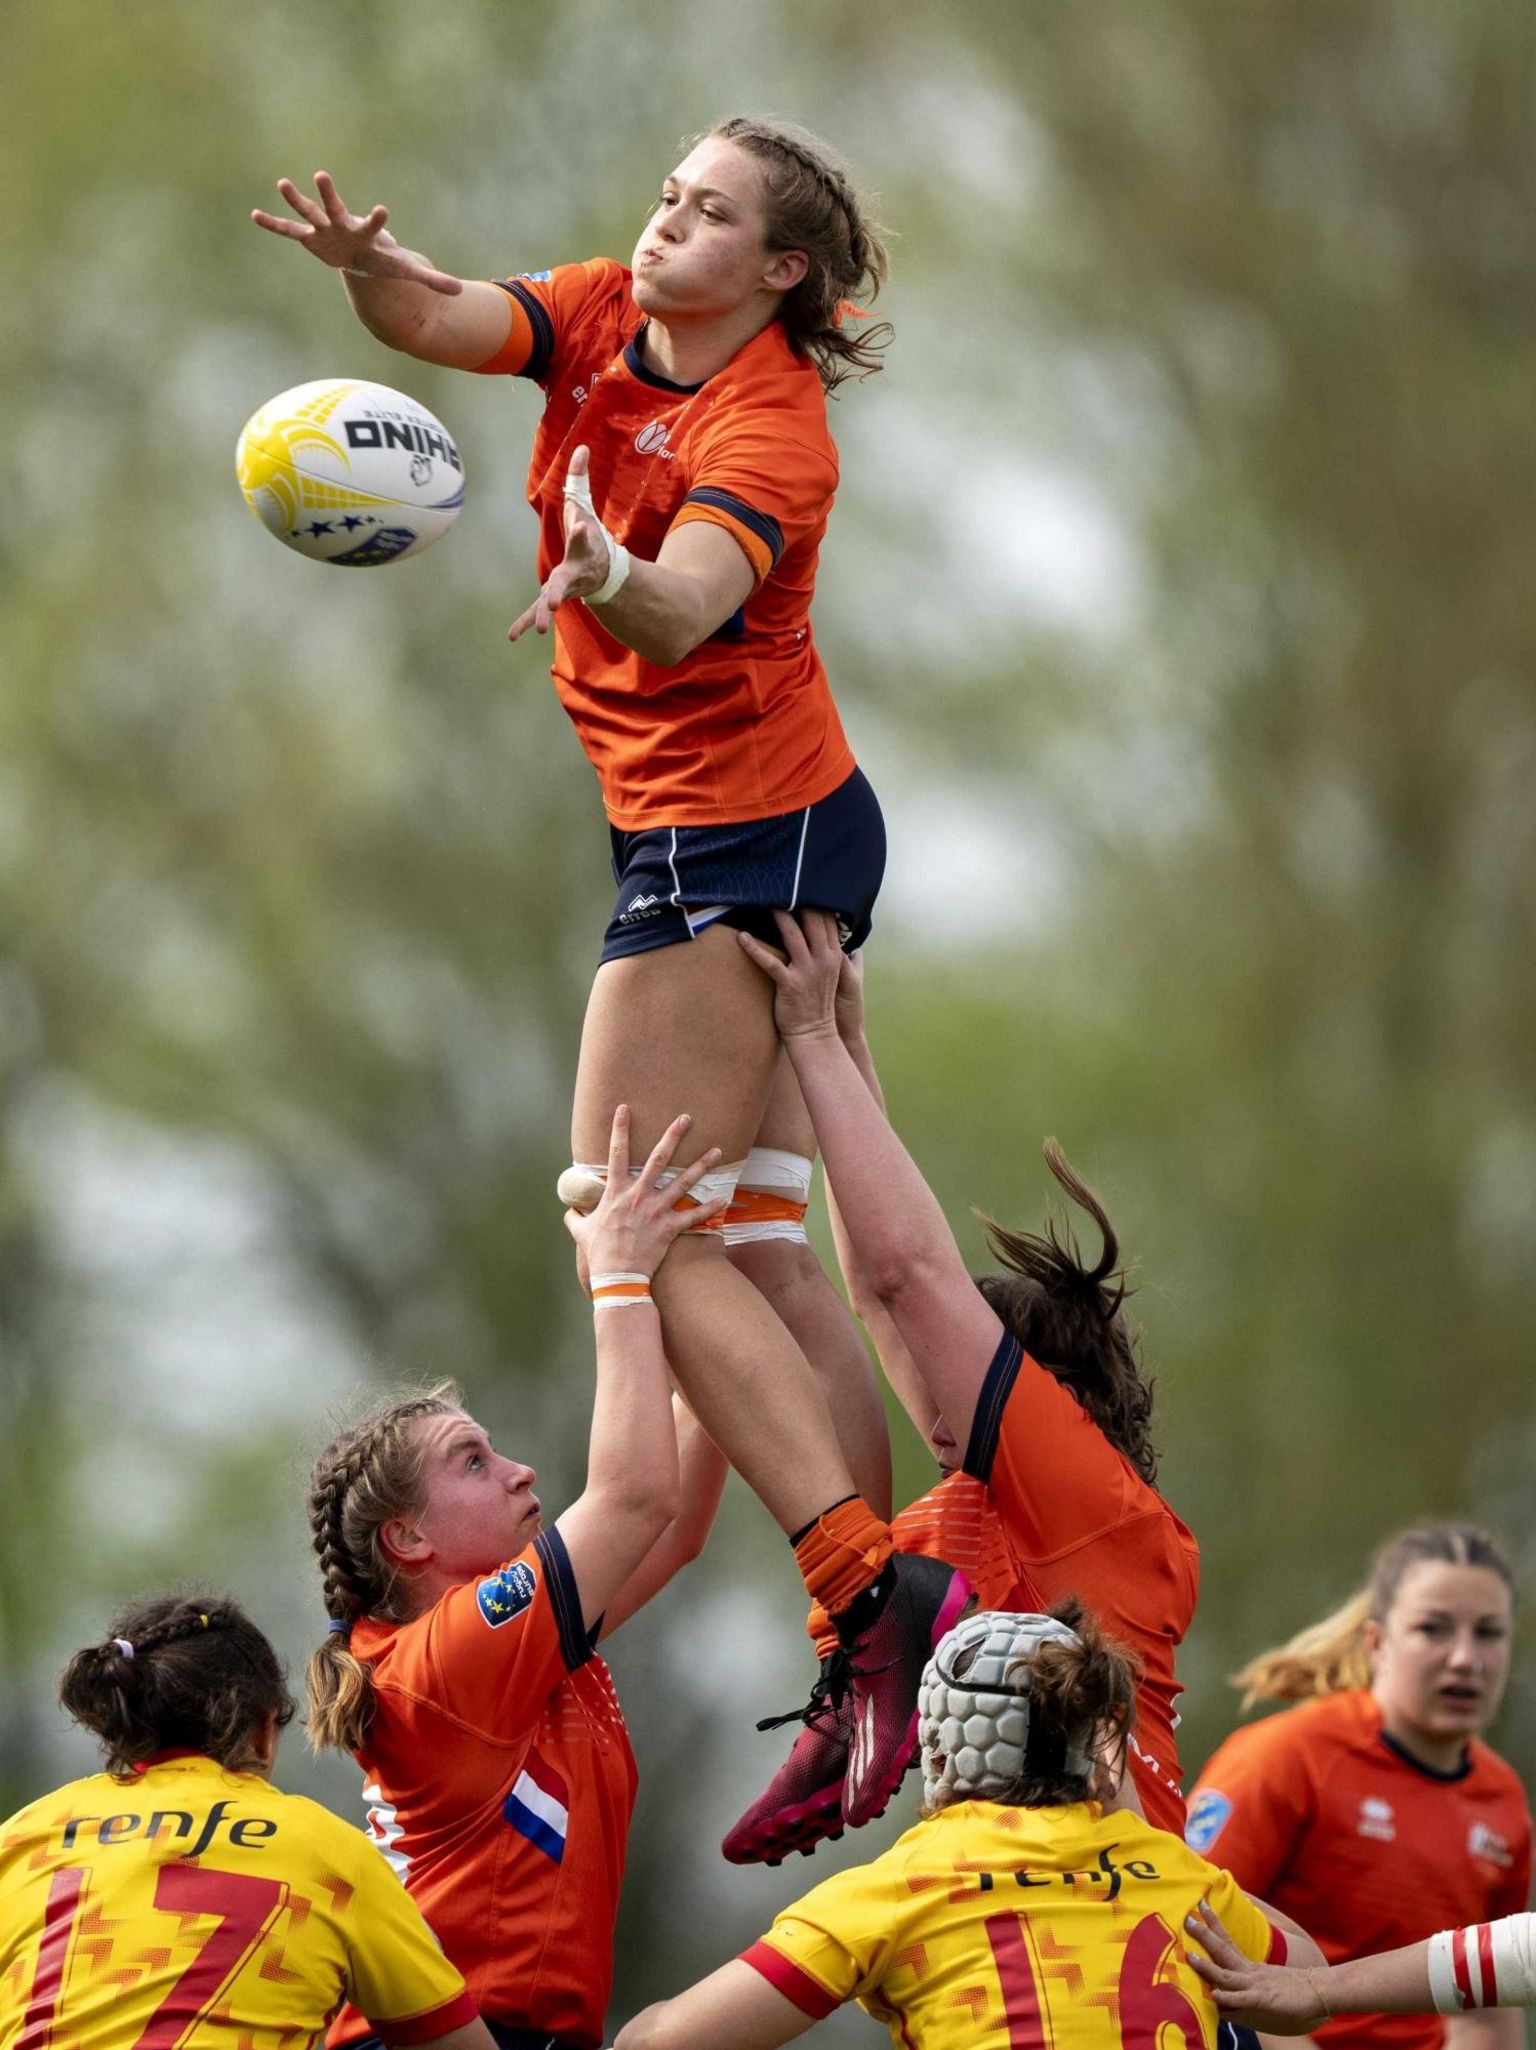 Isa Prins of the Dutch team in action